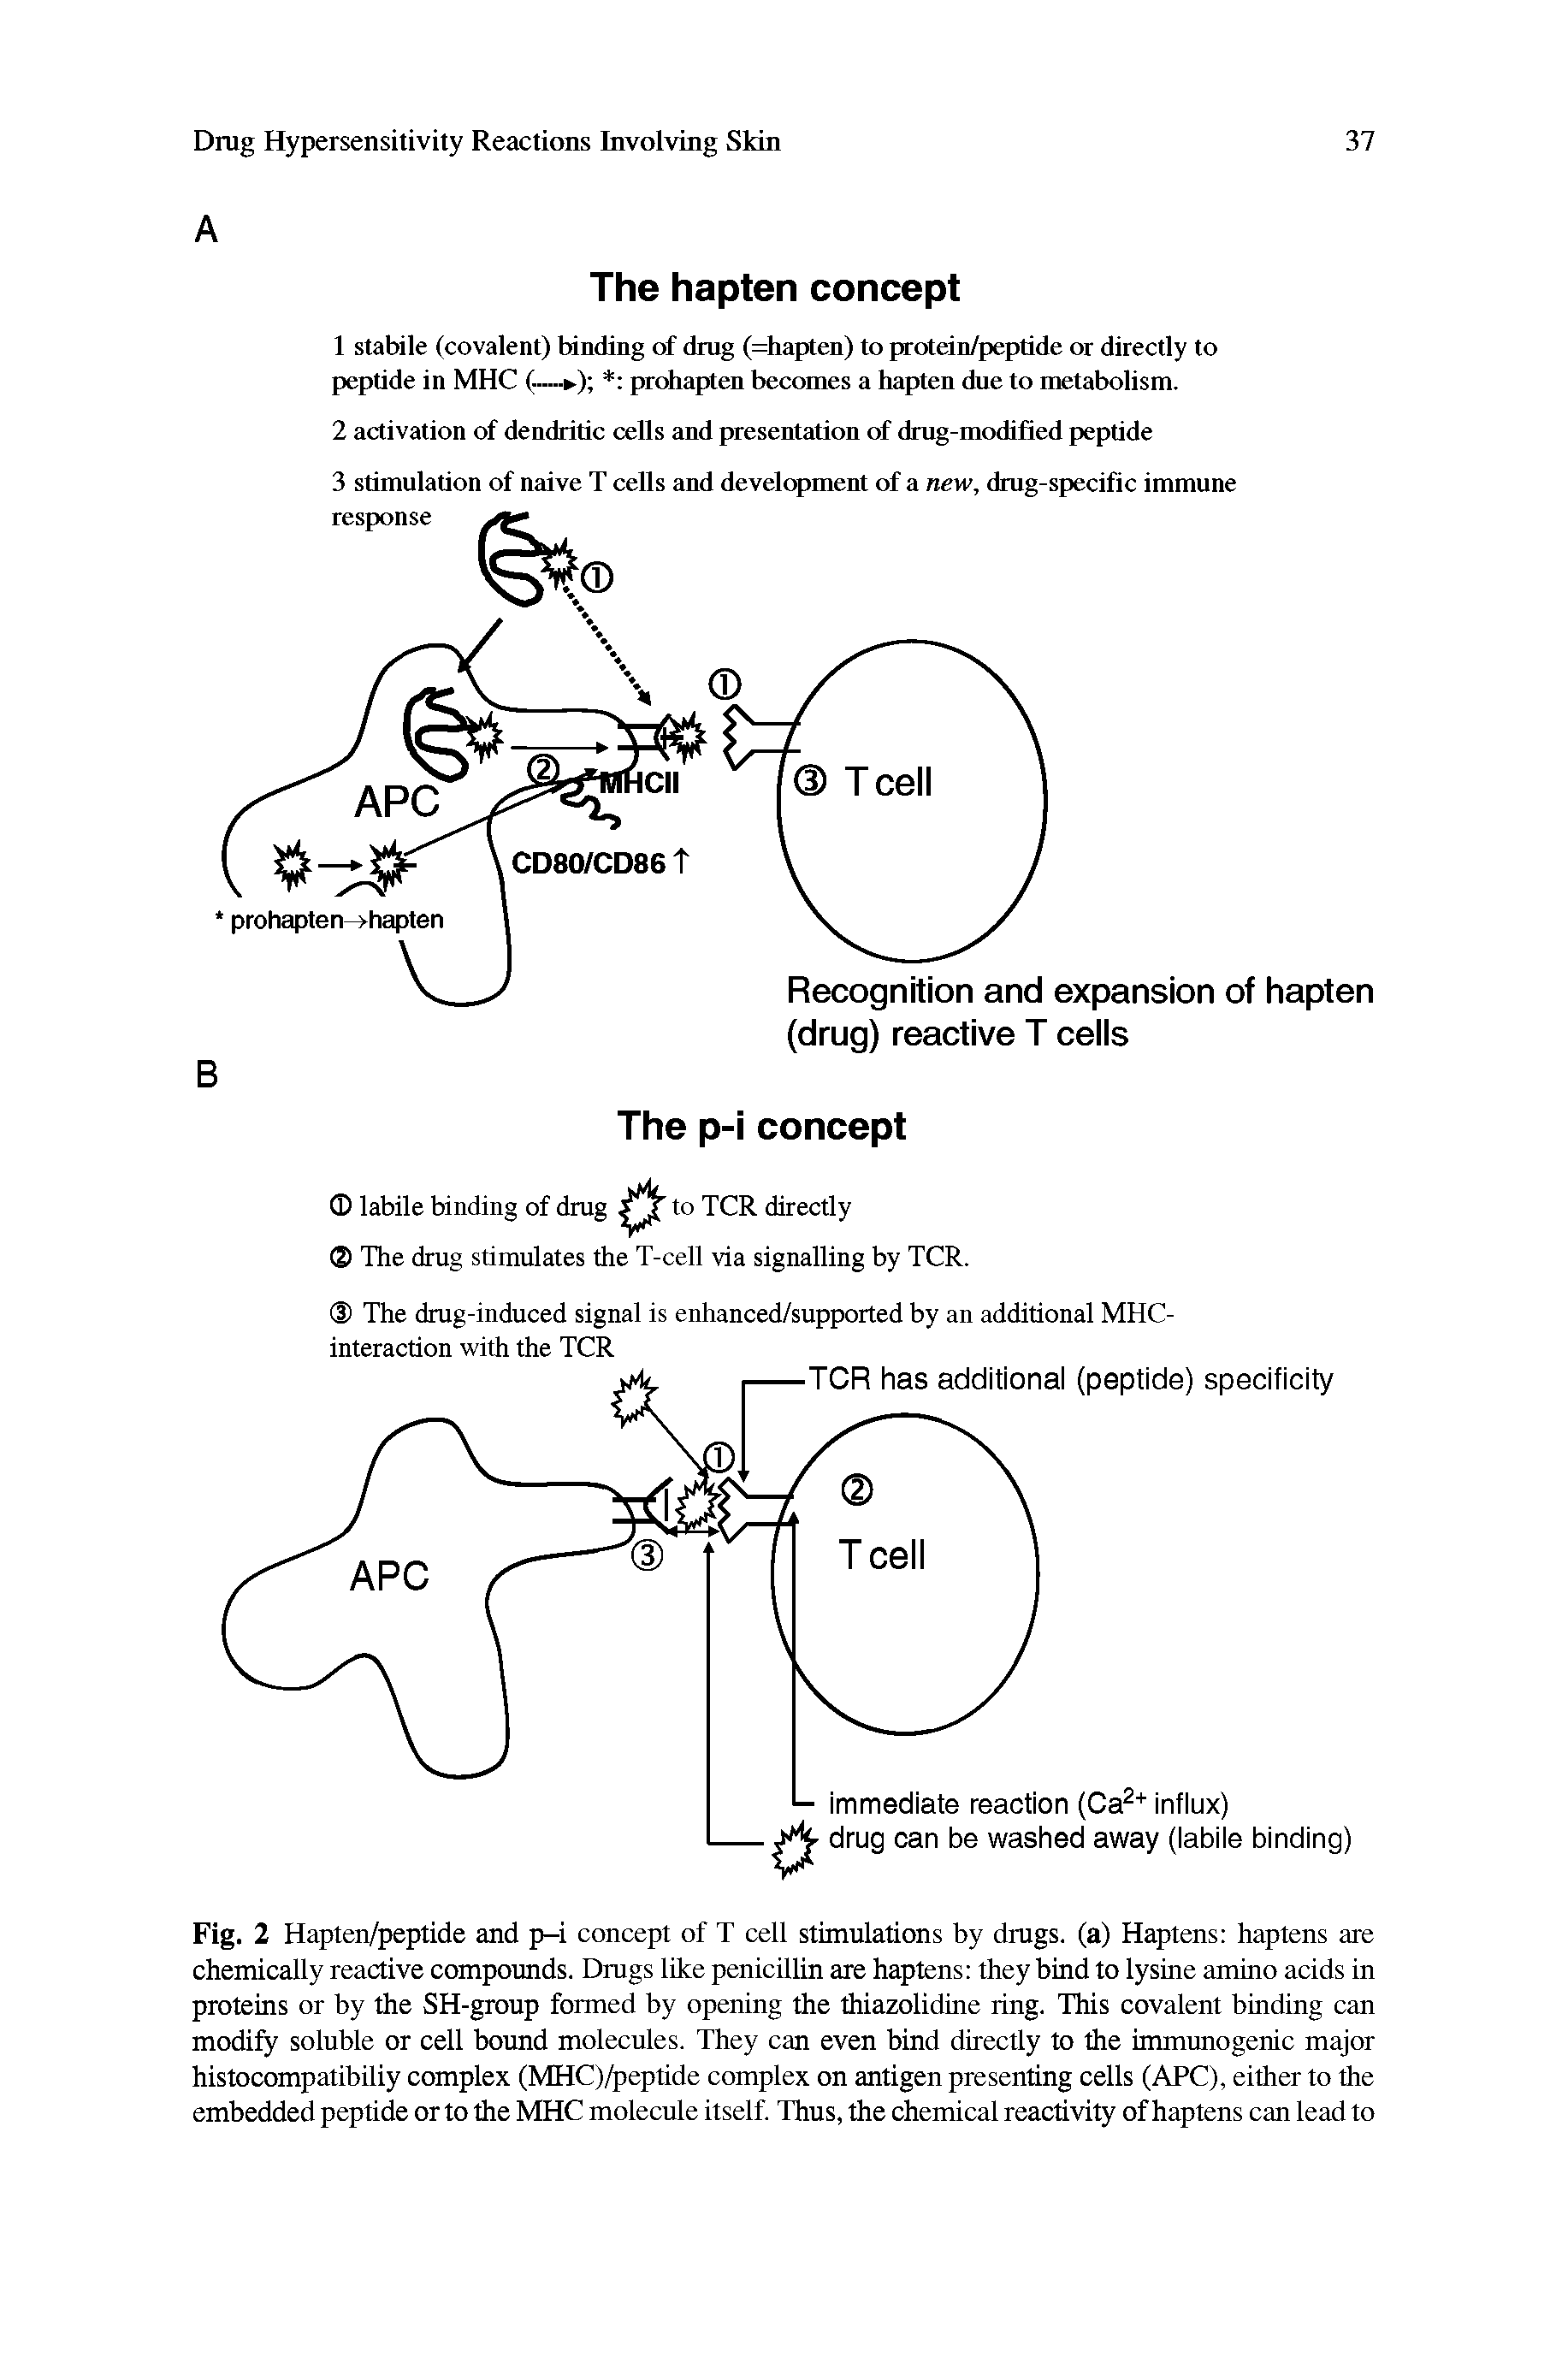 Fig. 2 Hapten/peptide and p-i concept of T cell stimulations by drugs, (a) Haptens haptens are chemically reactive compounds. Drugs like penicillin are haptens they bind to lysine amino acids in proteins or by the SH-group formed by opening the thiazolidine ring. This covalent binding can modify soluble or cell bound molecules. They can even bind directly to the immunogenic major histocompatibiliy complex (MHC)/peptide complex on antigen presenting cells (ARC), either to the embedded peptide or to the MHC molecule itself. Thus, the chemical reactivity of haptens can lead to...